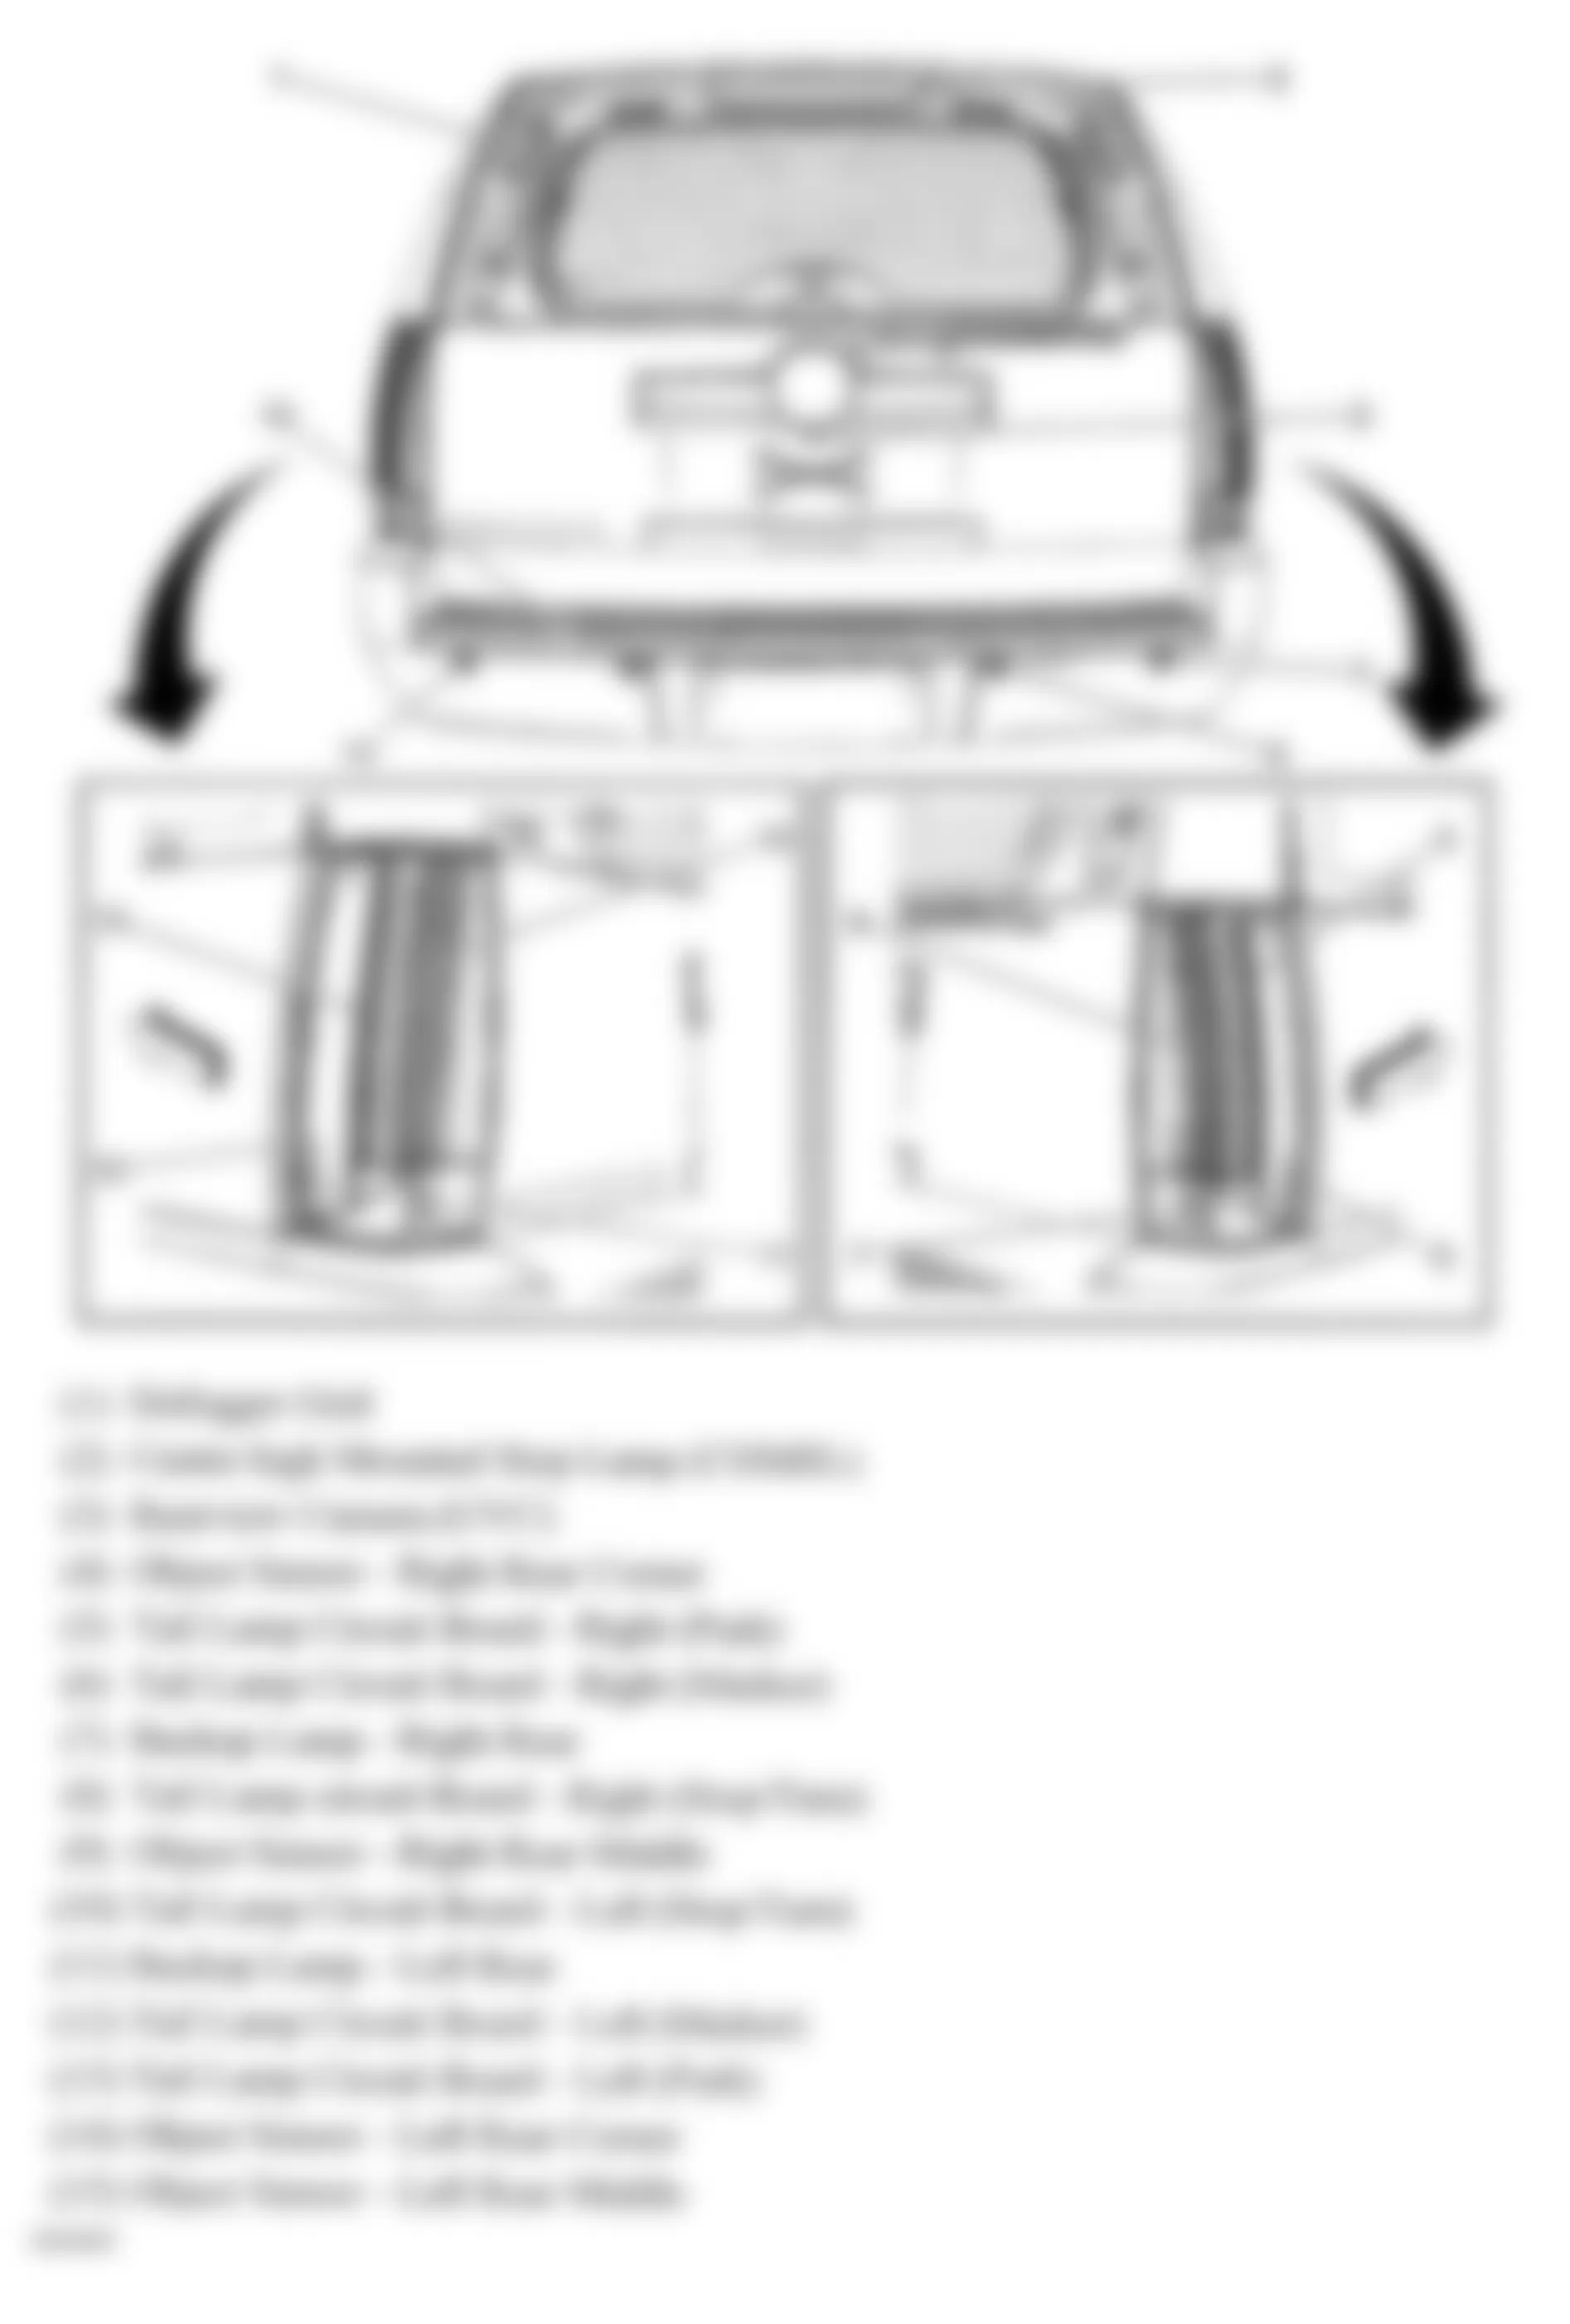 GMC Yukon XL C2500 2008 - Component Locations -  Rear Of Vehicle (Tahoe & Escalade W/One Piece Liftgate)